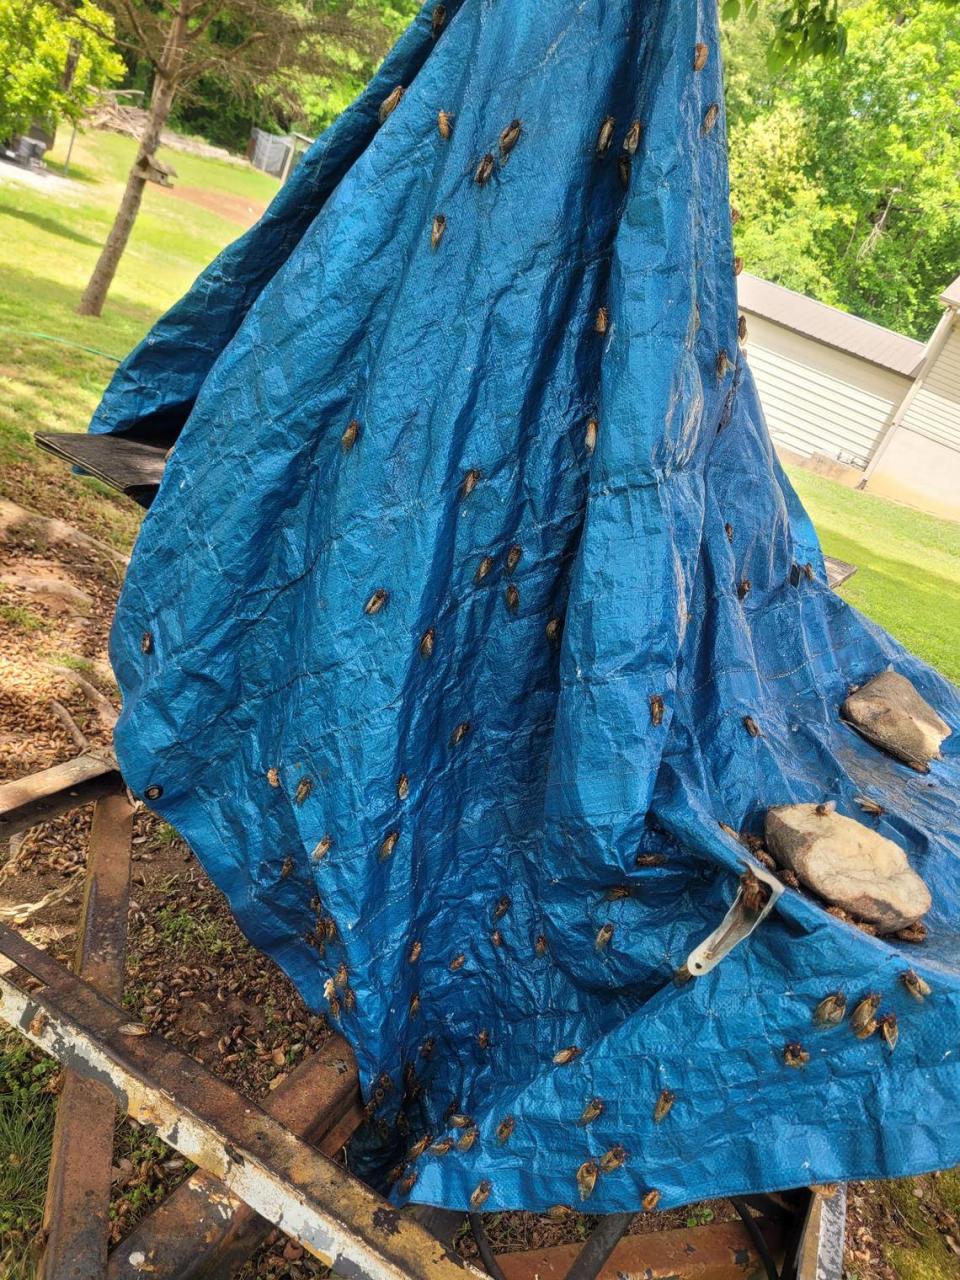 Brood X cicadas have taken over a blue tarp Donya Broda’s husband uses to cover his smoker in the backyard of their Wilkesboro home.